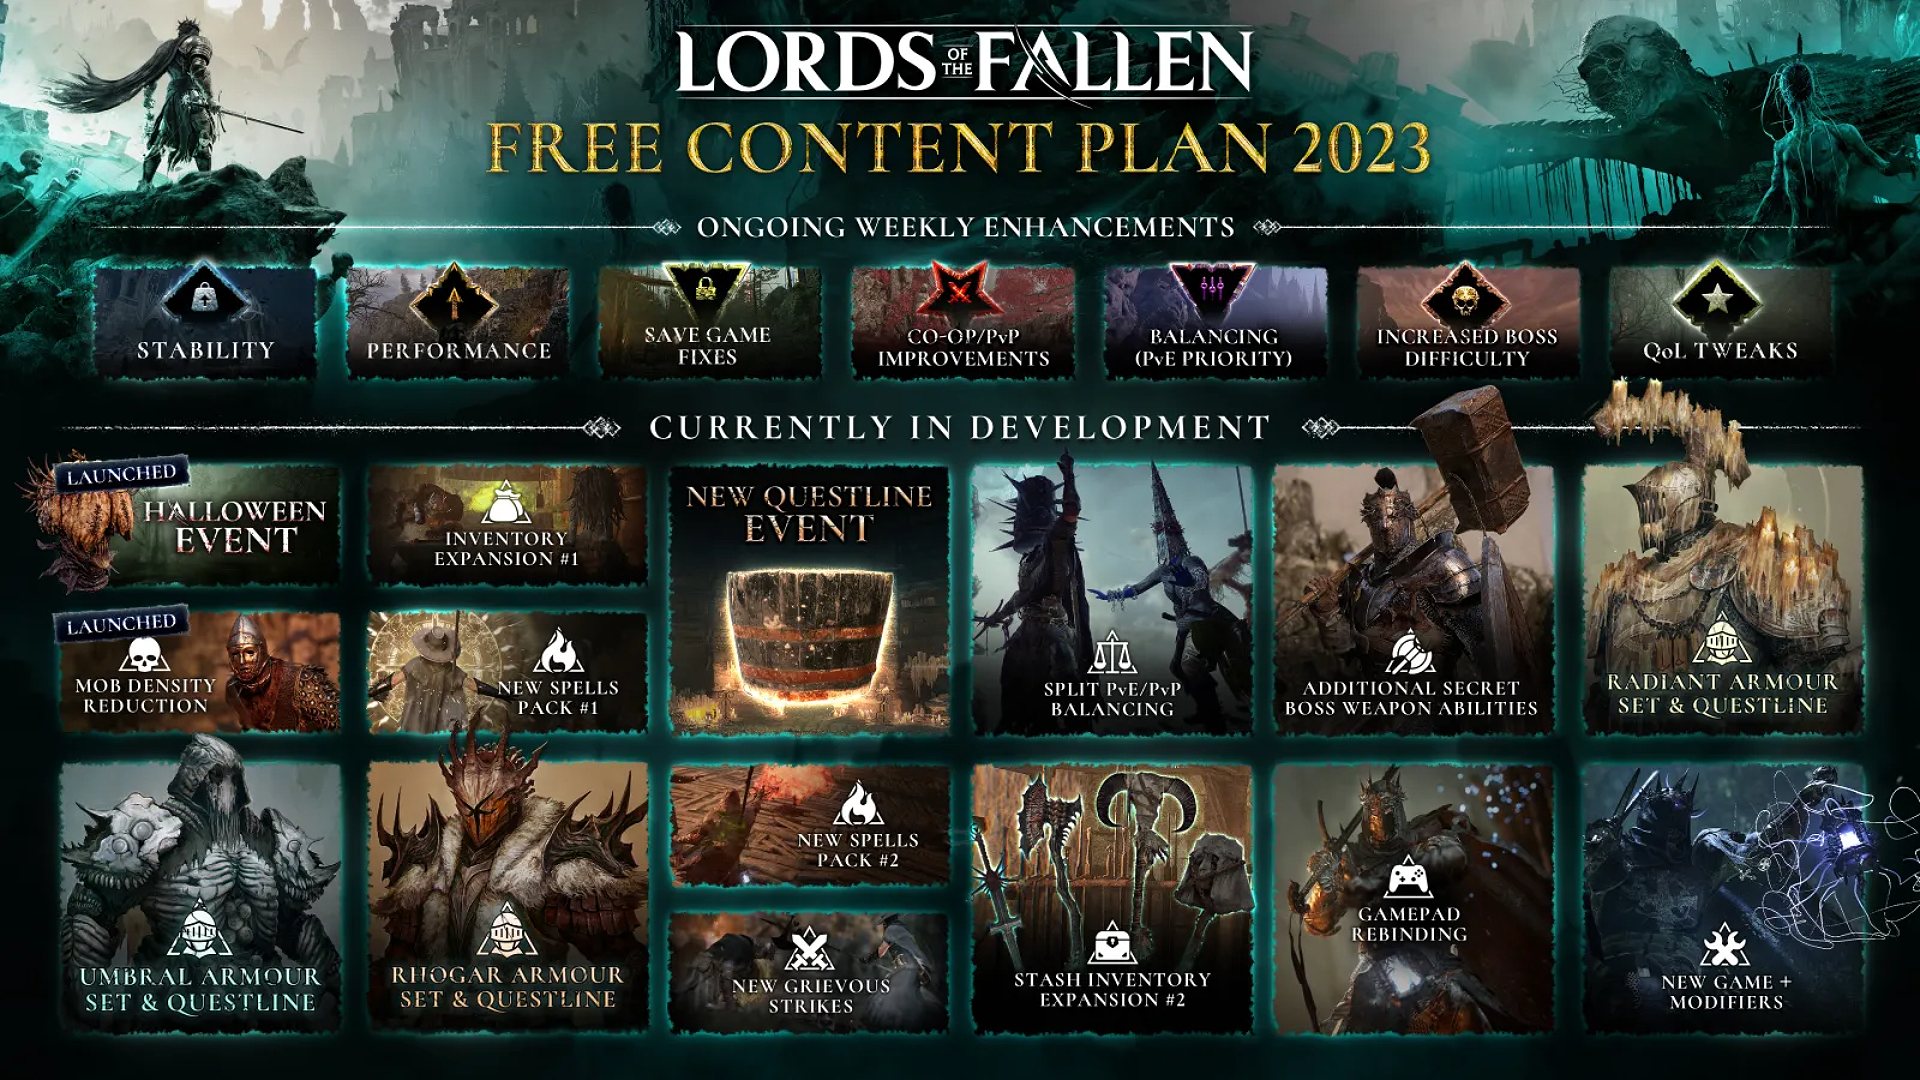 The 2023 Lords of the Fallen roadmap